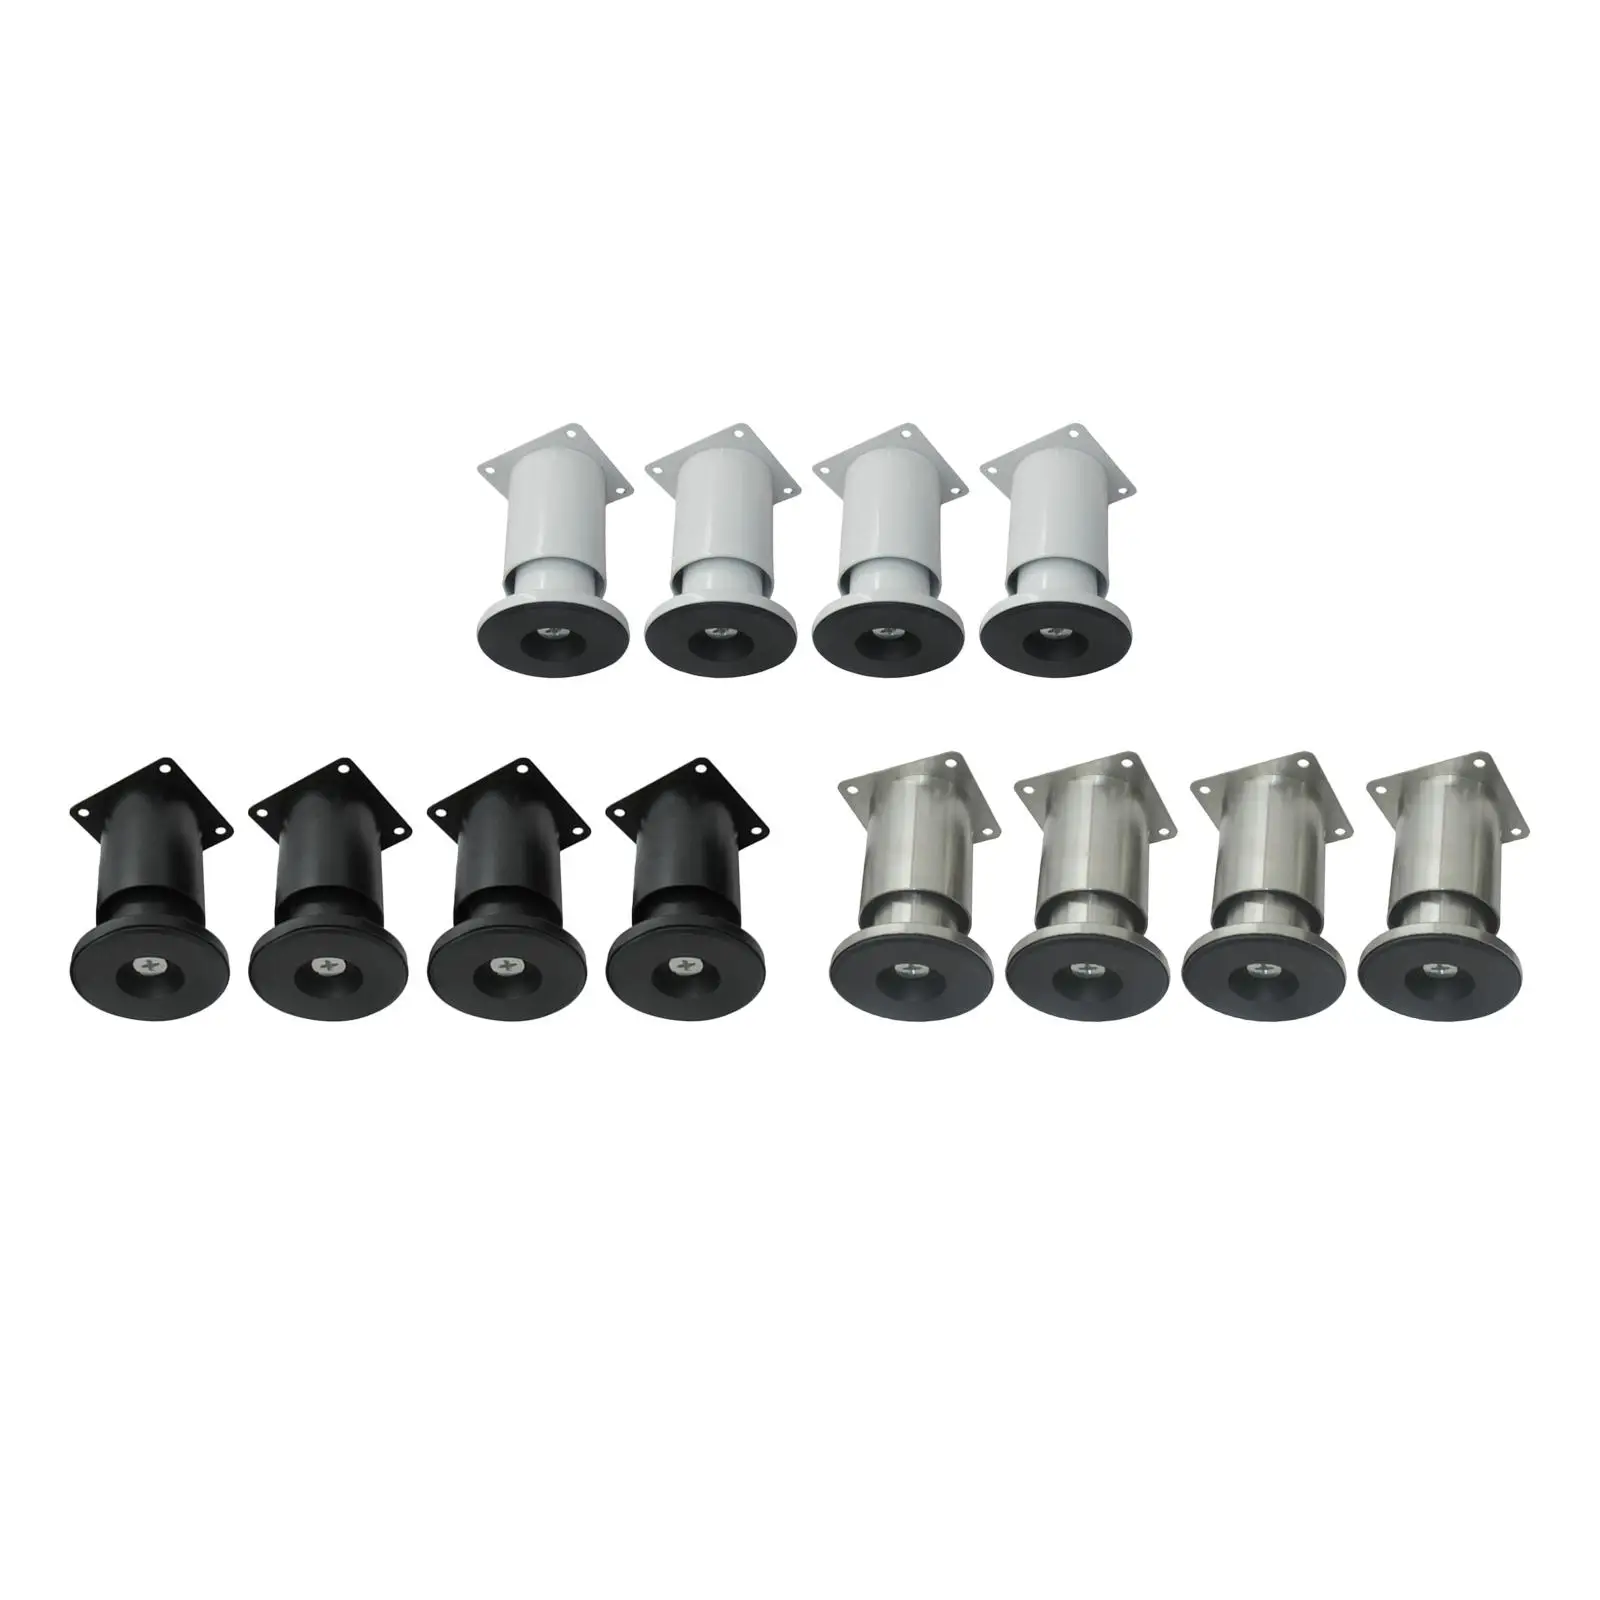 4Pcs Furniture Leg Reinforced Multipurpose with Screws Cabinet Foot Couch Legs for Wardrobes Coffee Tables Dresser Sofas Beds